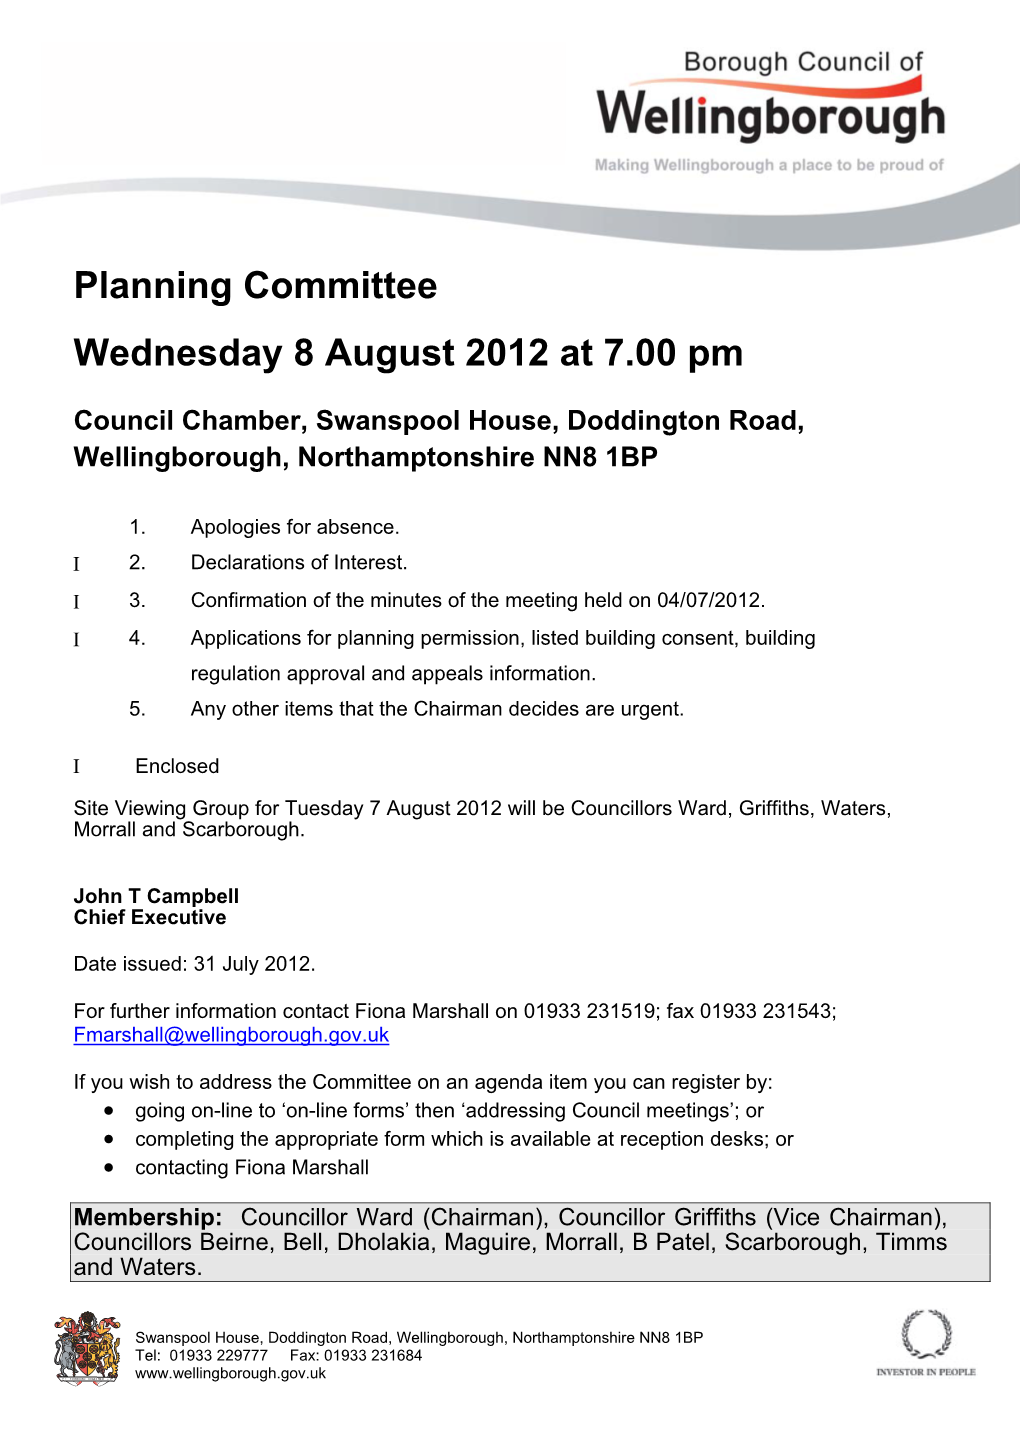 Planning Committee Wednesday 8 August 2012 at 7.00 Pm